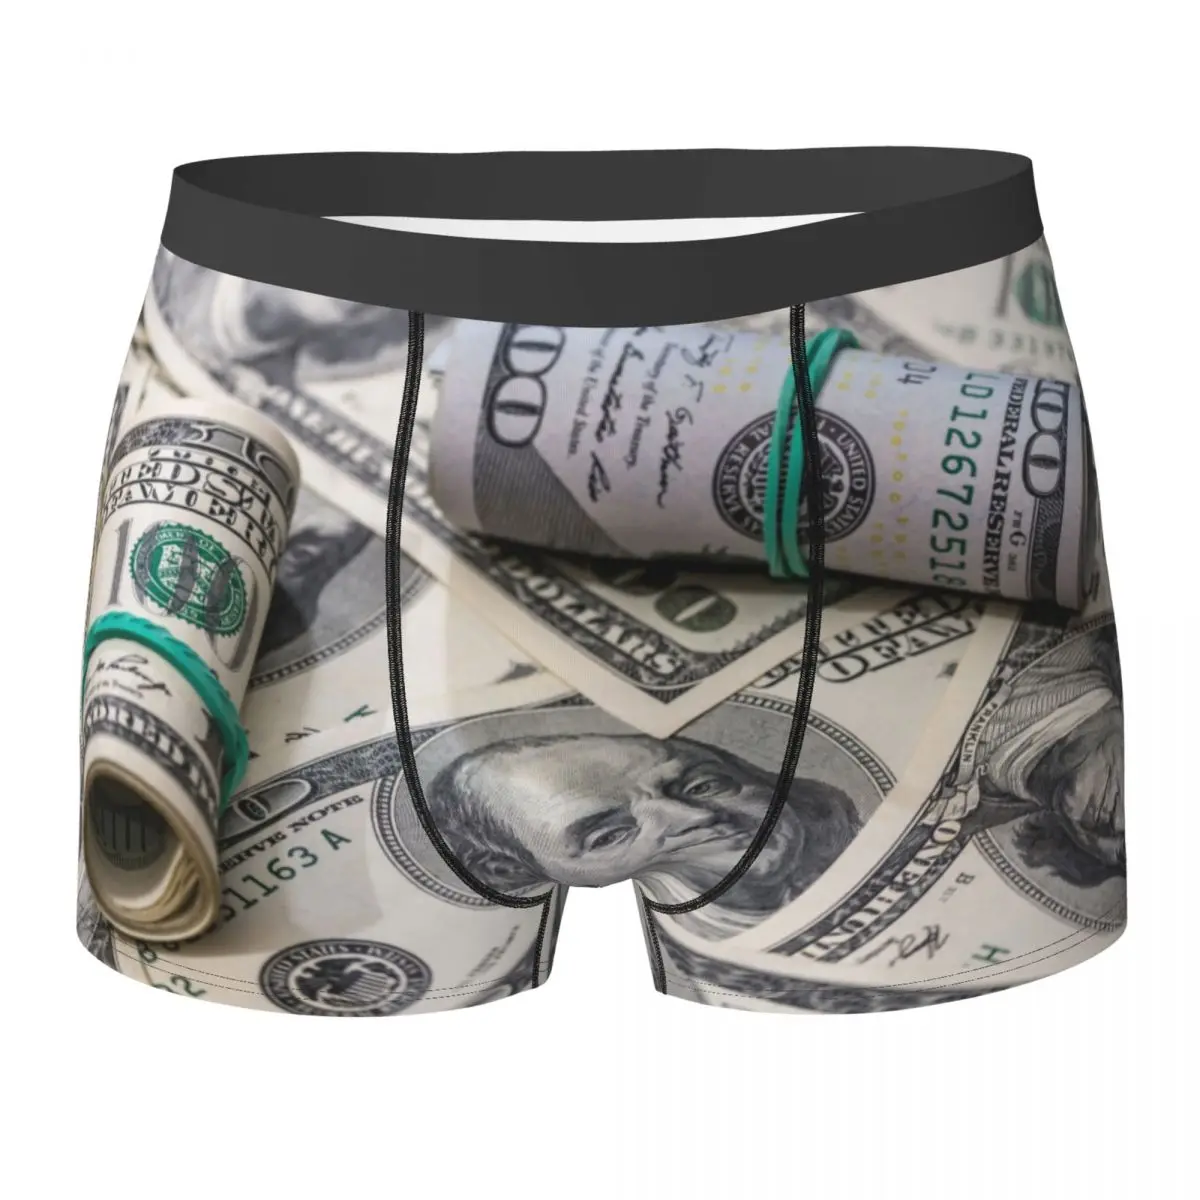 

Men's Panties Underpants Boxers Money Dollars Money Tied With An Elastic Band Underwear Sexy Male Shorts